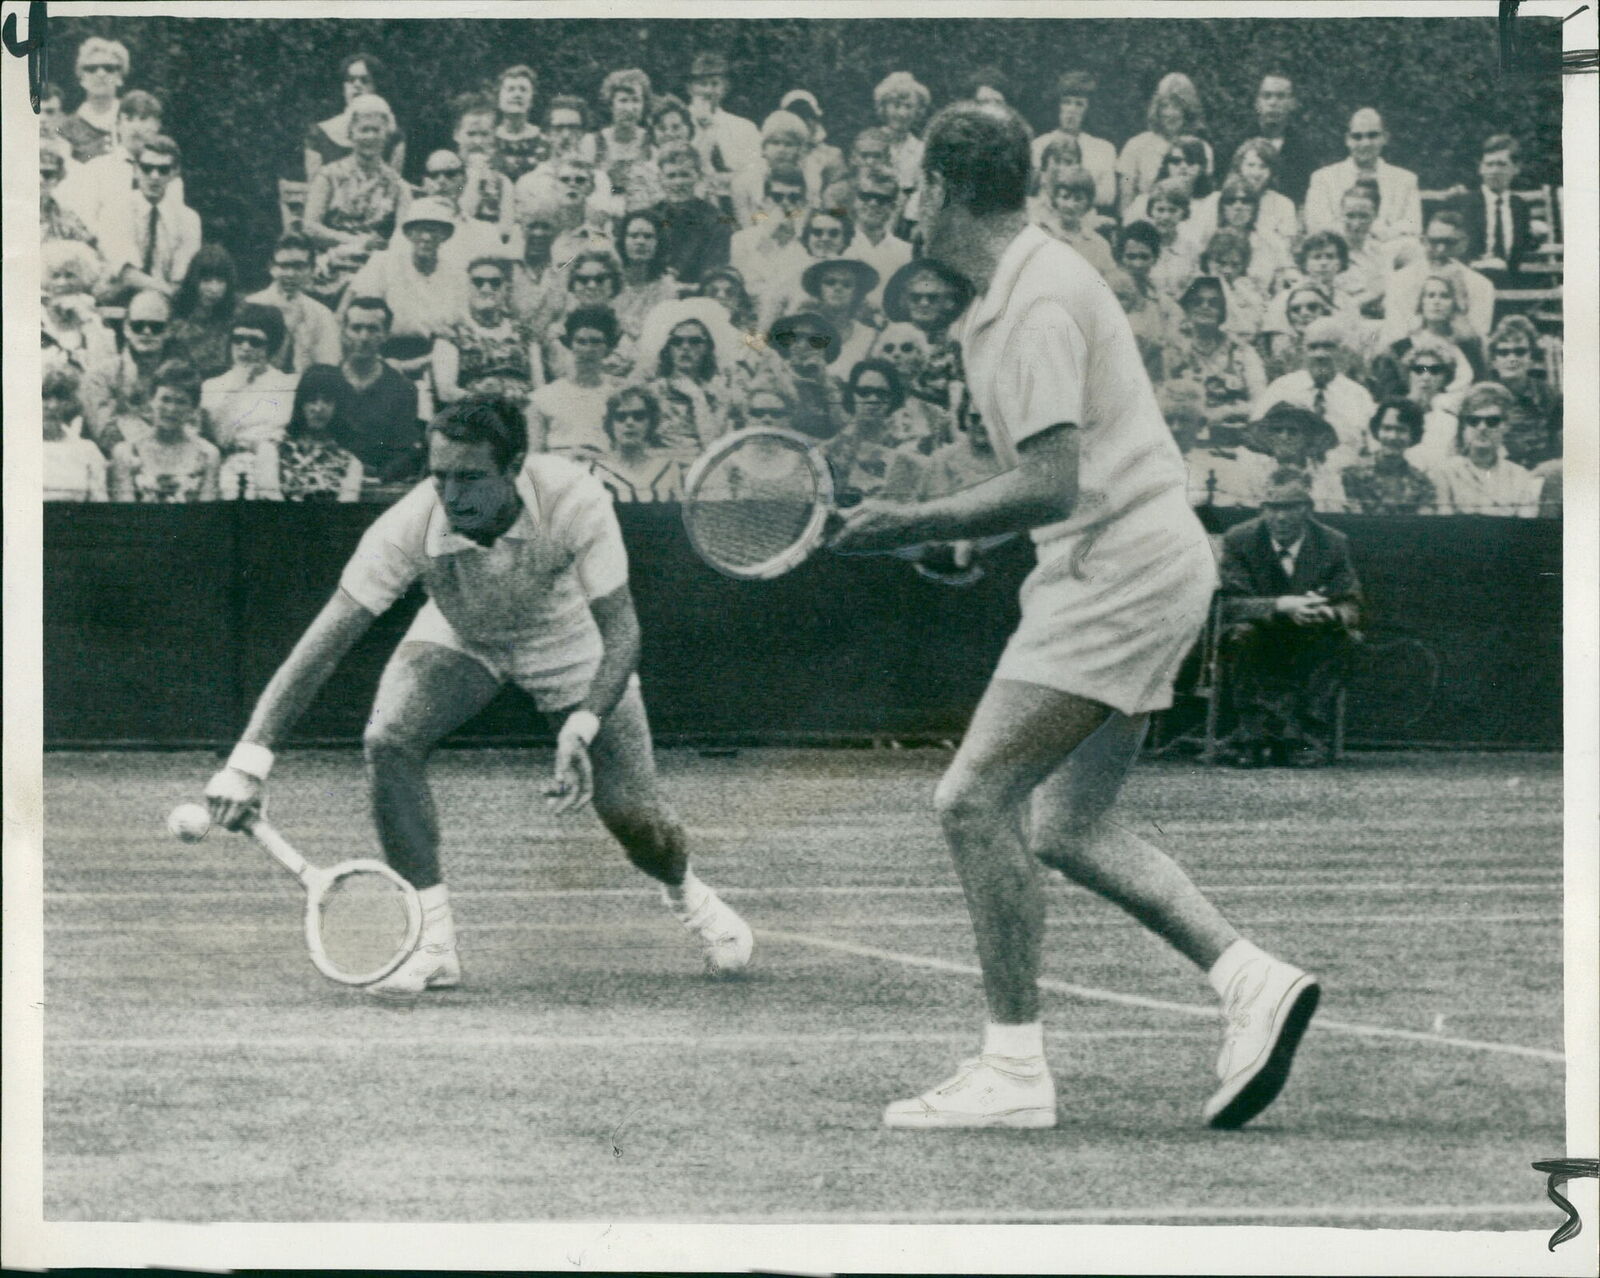 Mike Sangster British tennis player and wison. - Vintage Photograph 1401670